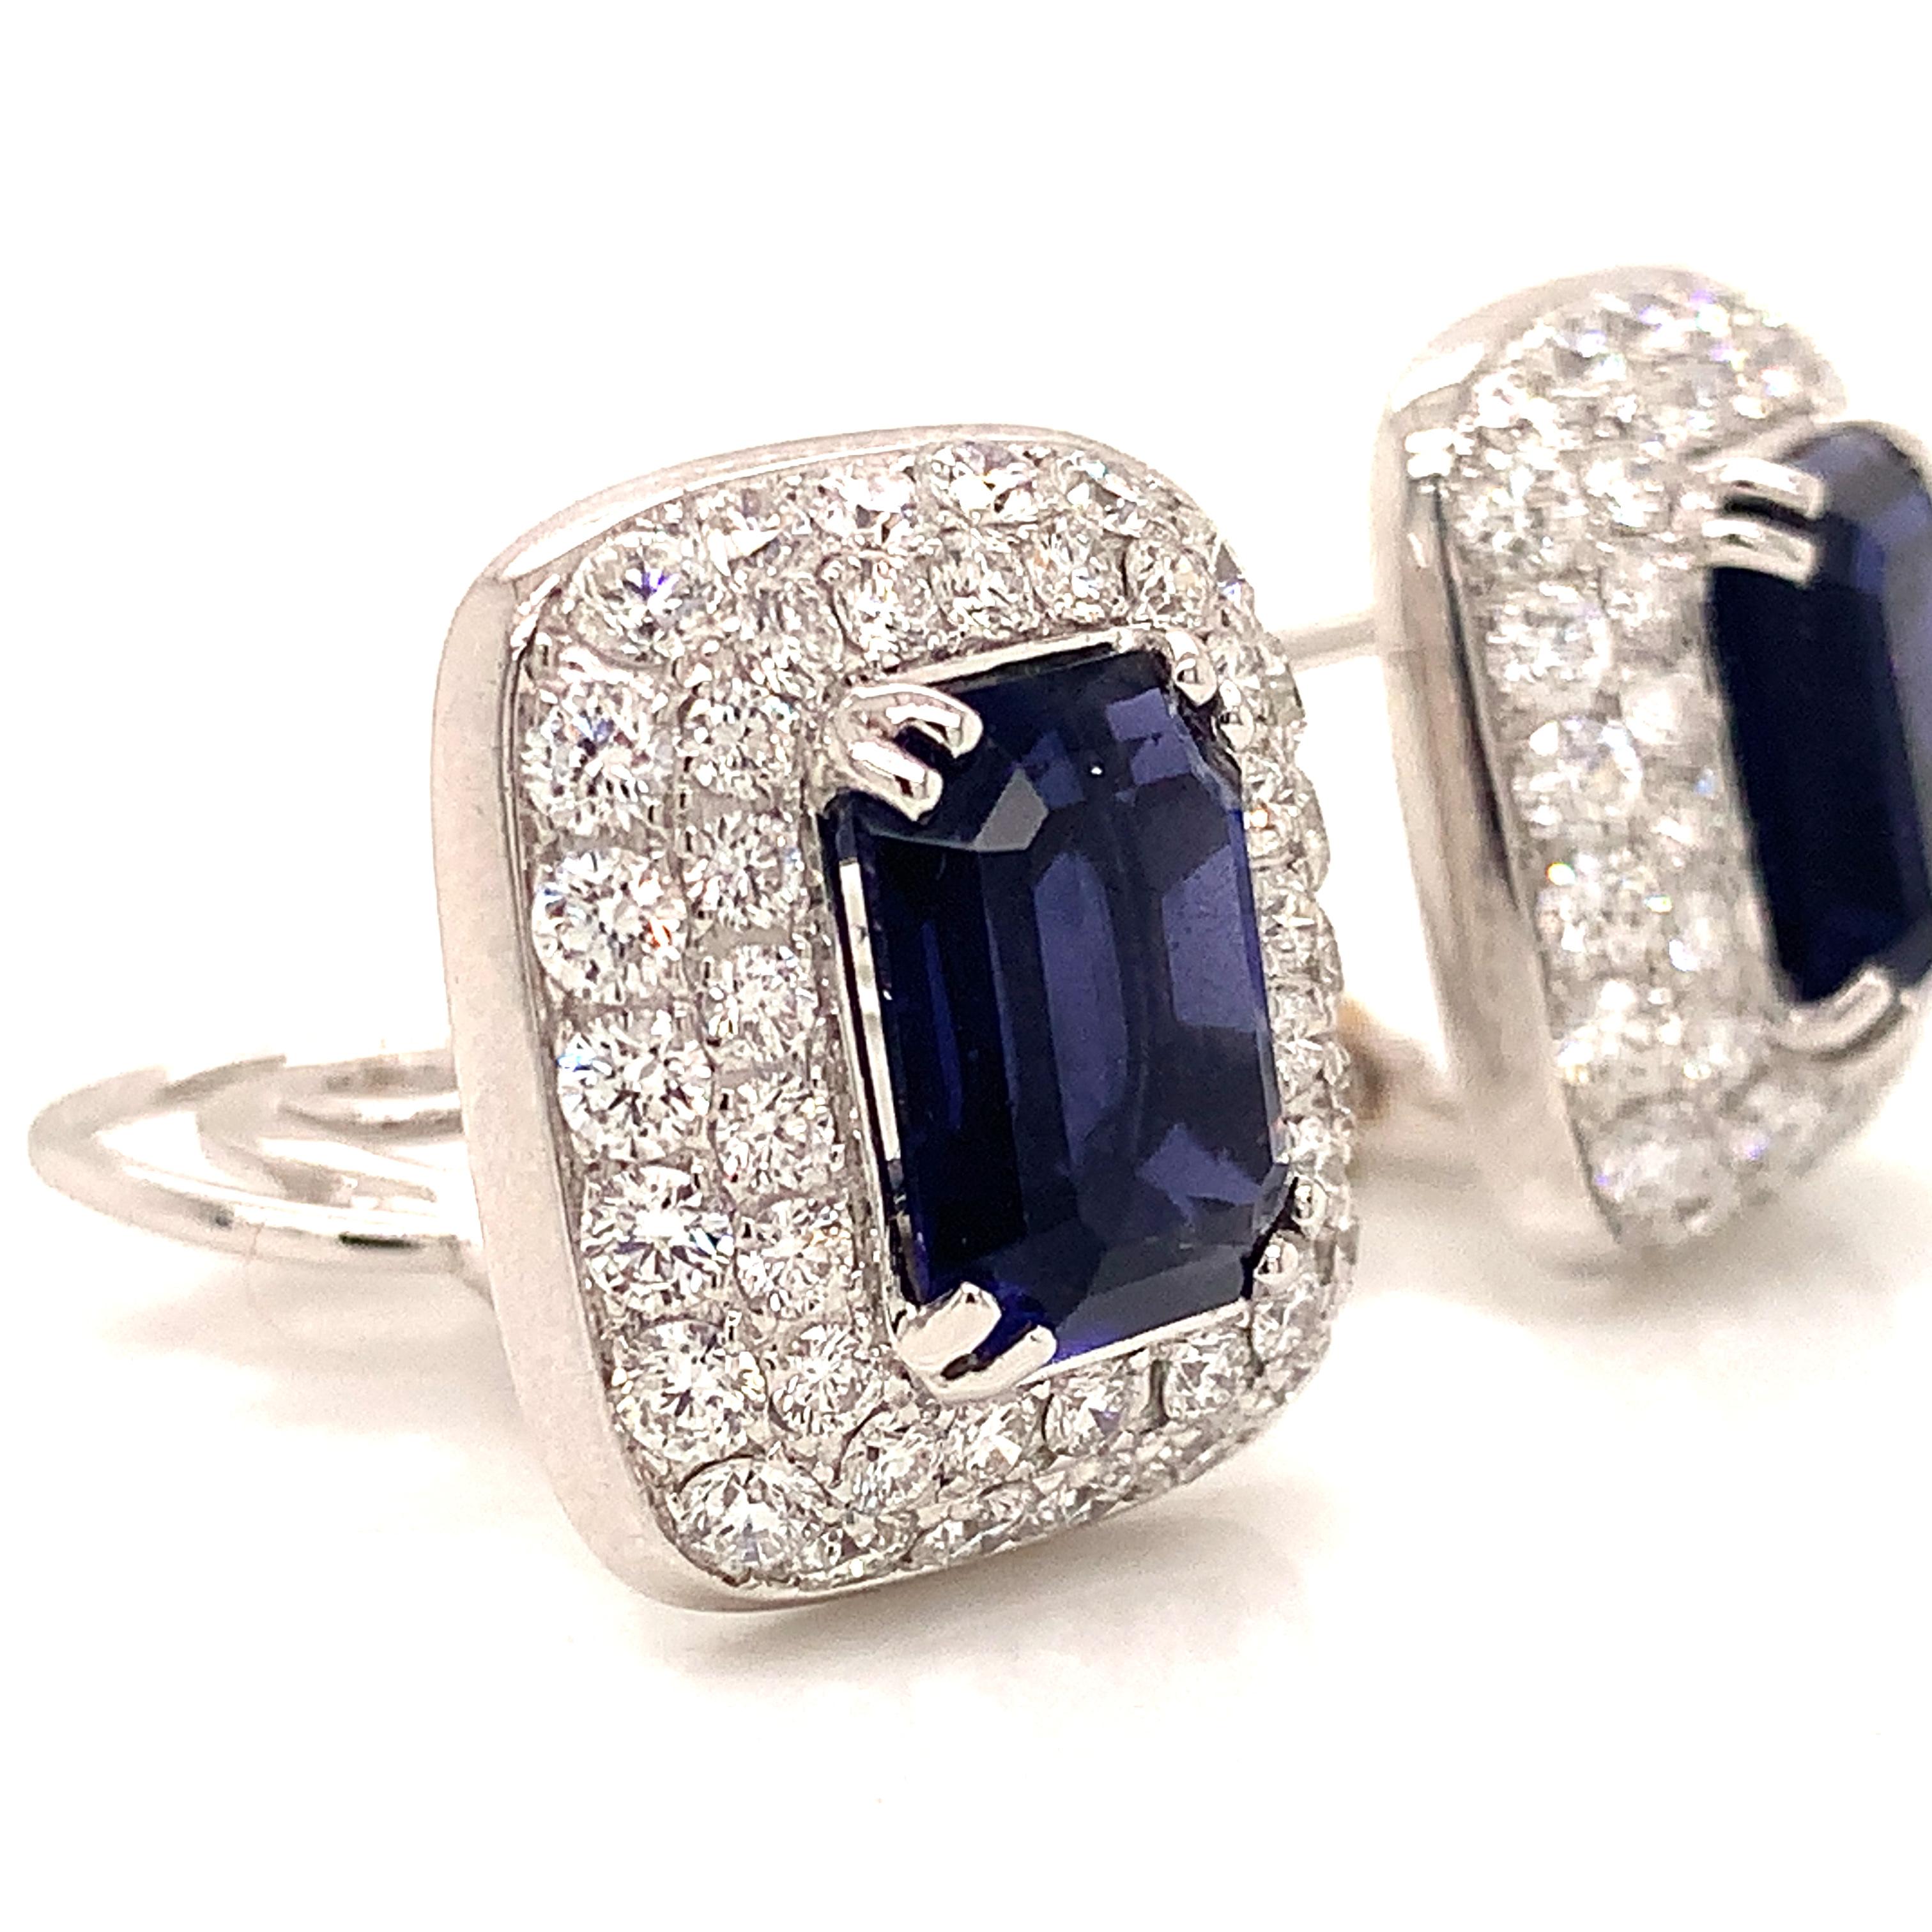 18 Karat White Gold Iolite and White   Diamonds    Earrings,  size mm19x17  with post and clip from the  Milano Garavelli Collection
18kt White gold   gr: 14.00
White  Diamonds ct 3.39
Blue Iolite ct 6.20
Matching ring also available upon request.
 
